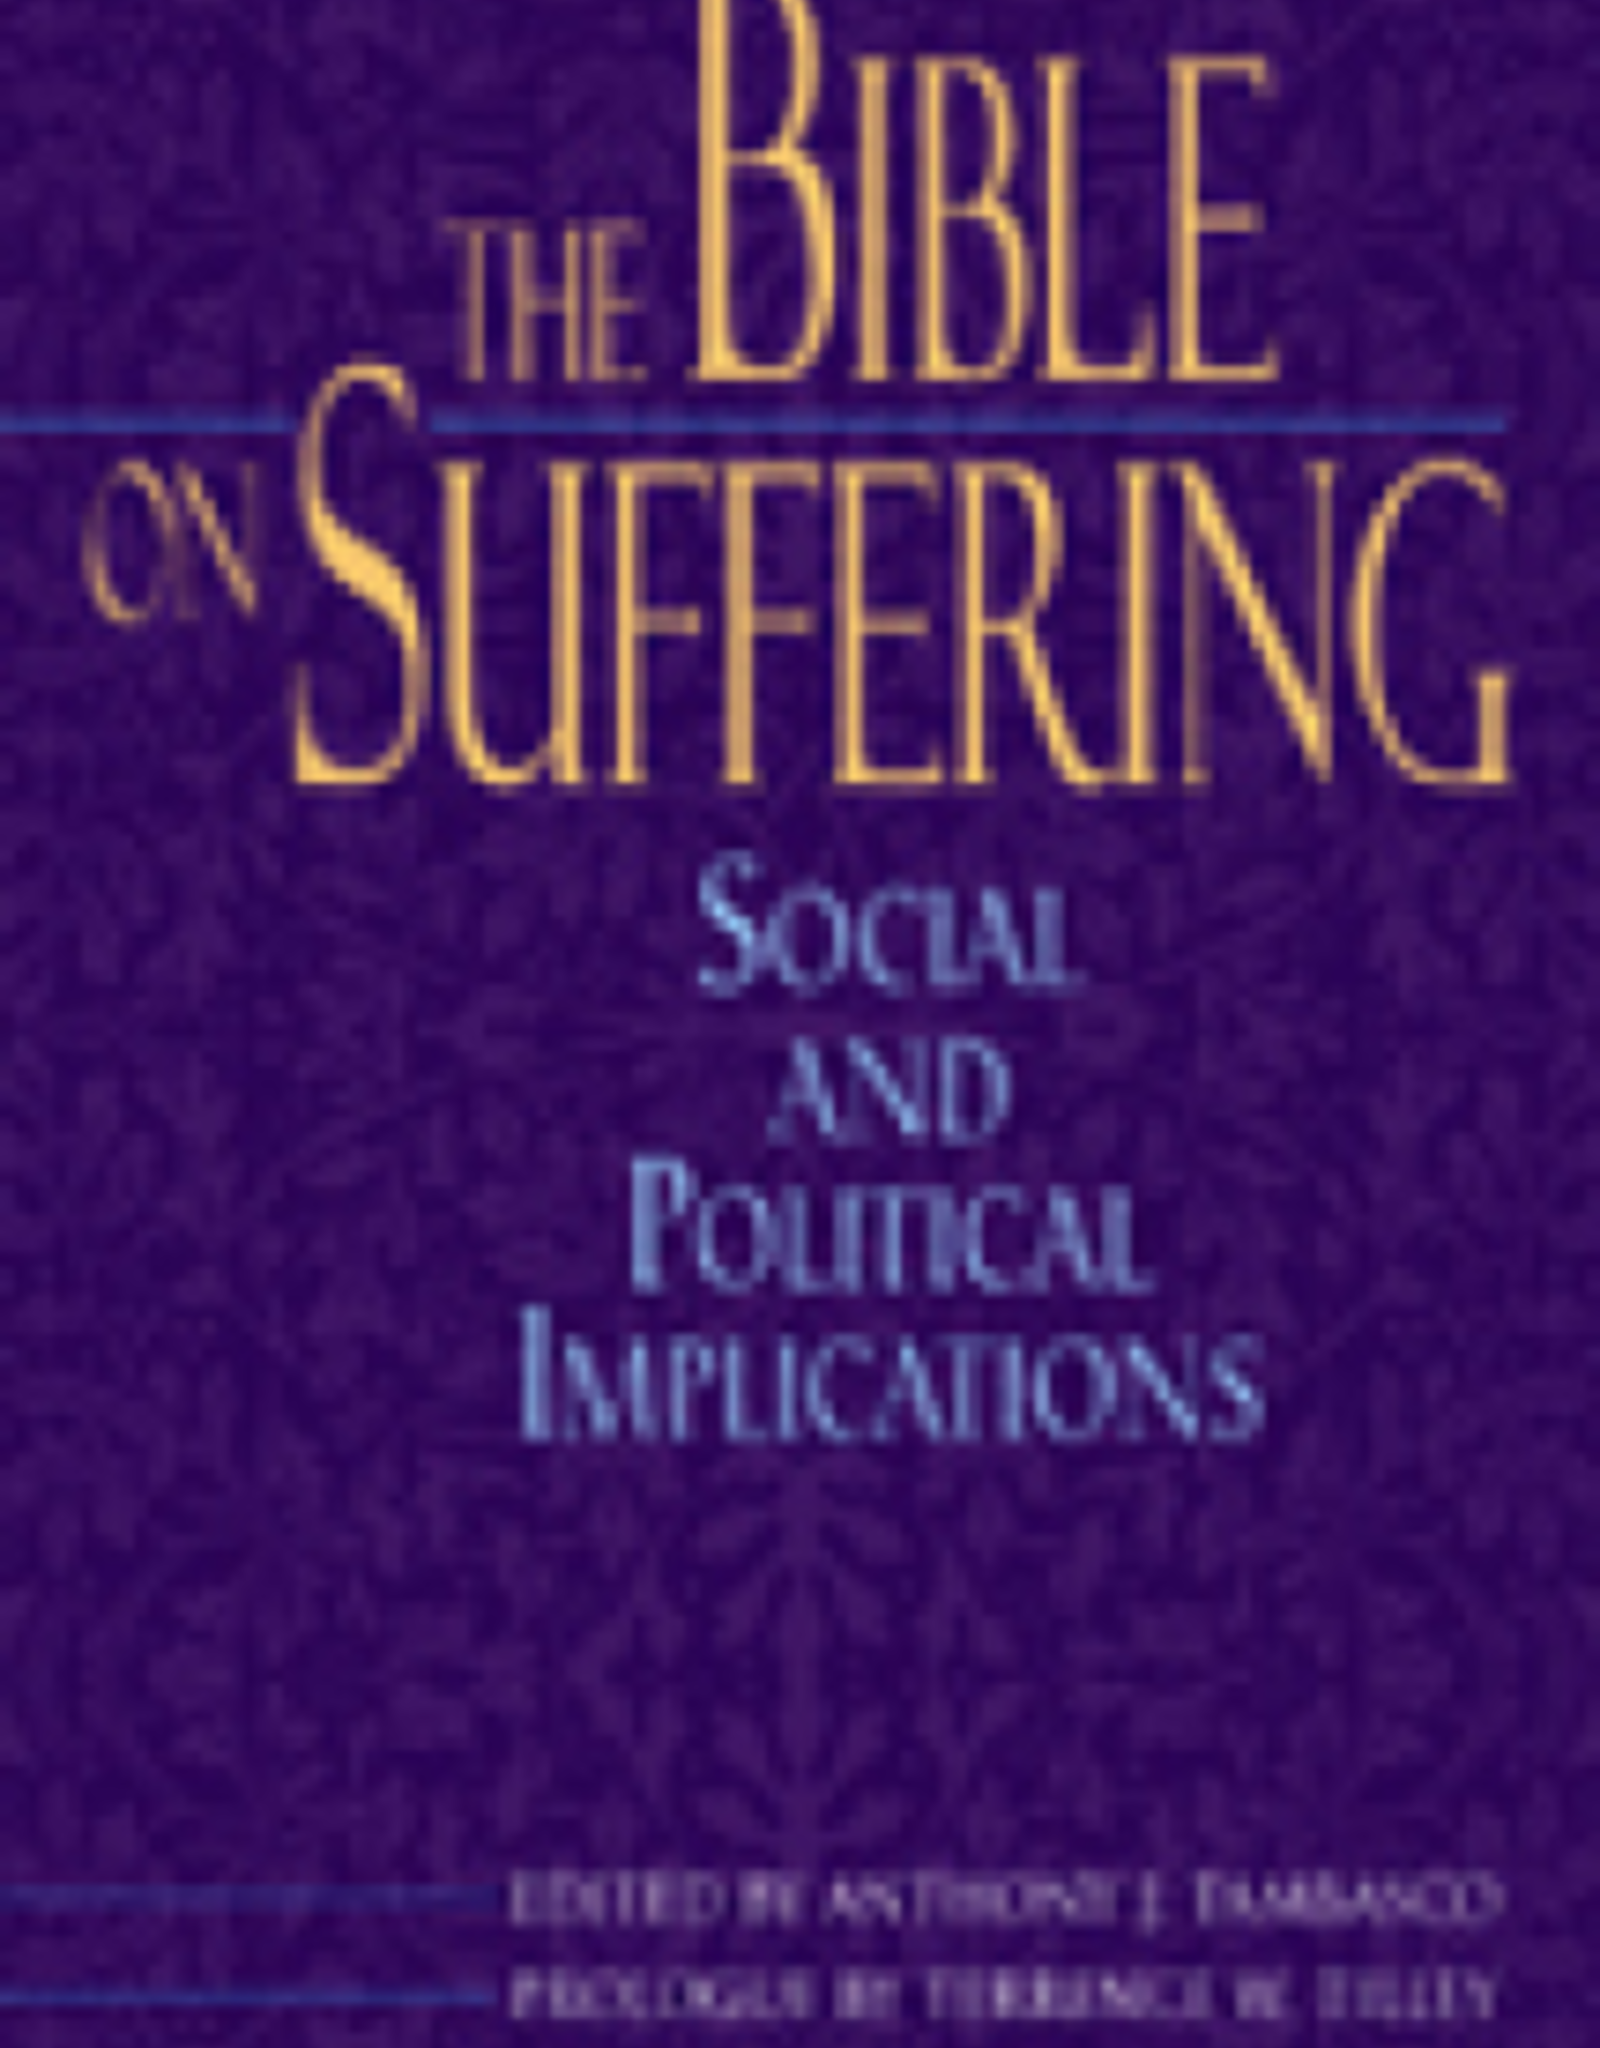 Paulist Press The Bible on Suffering:  Social and Political Implications, by Anthony J. Tambasco (paperback)